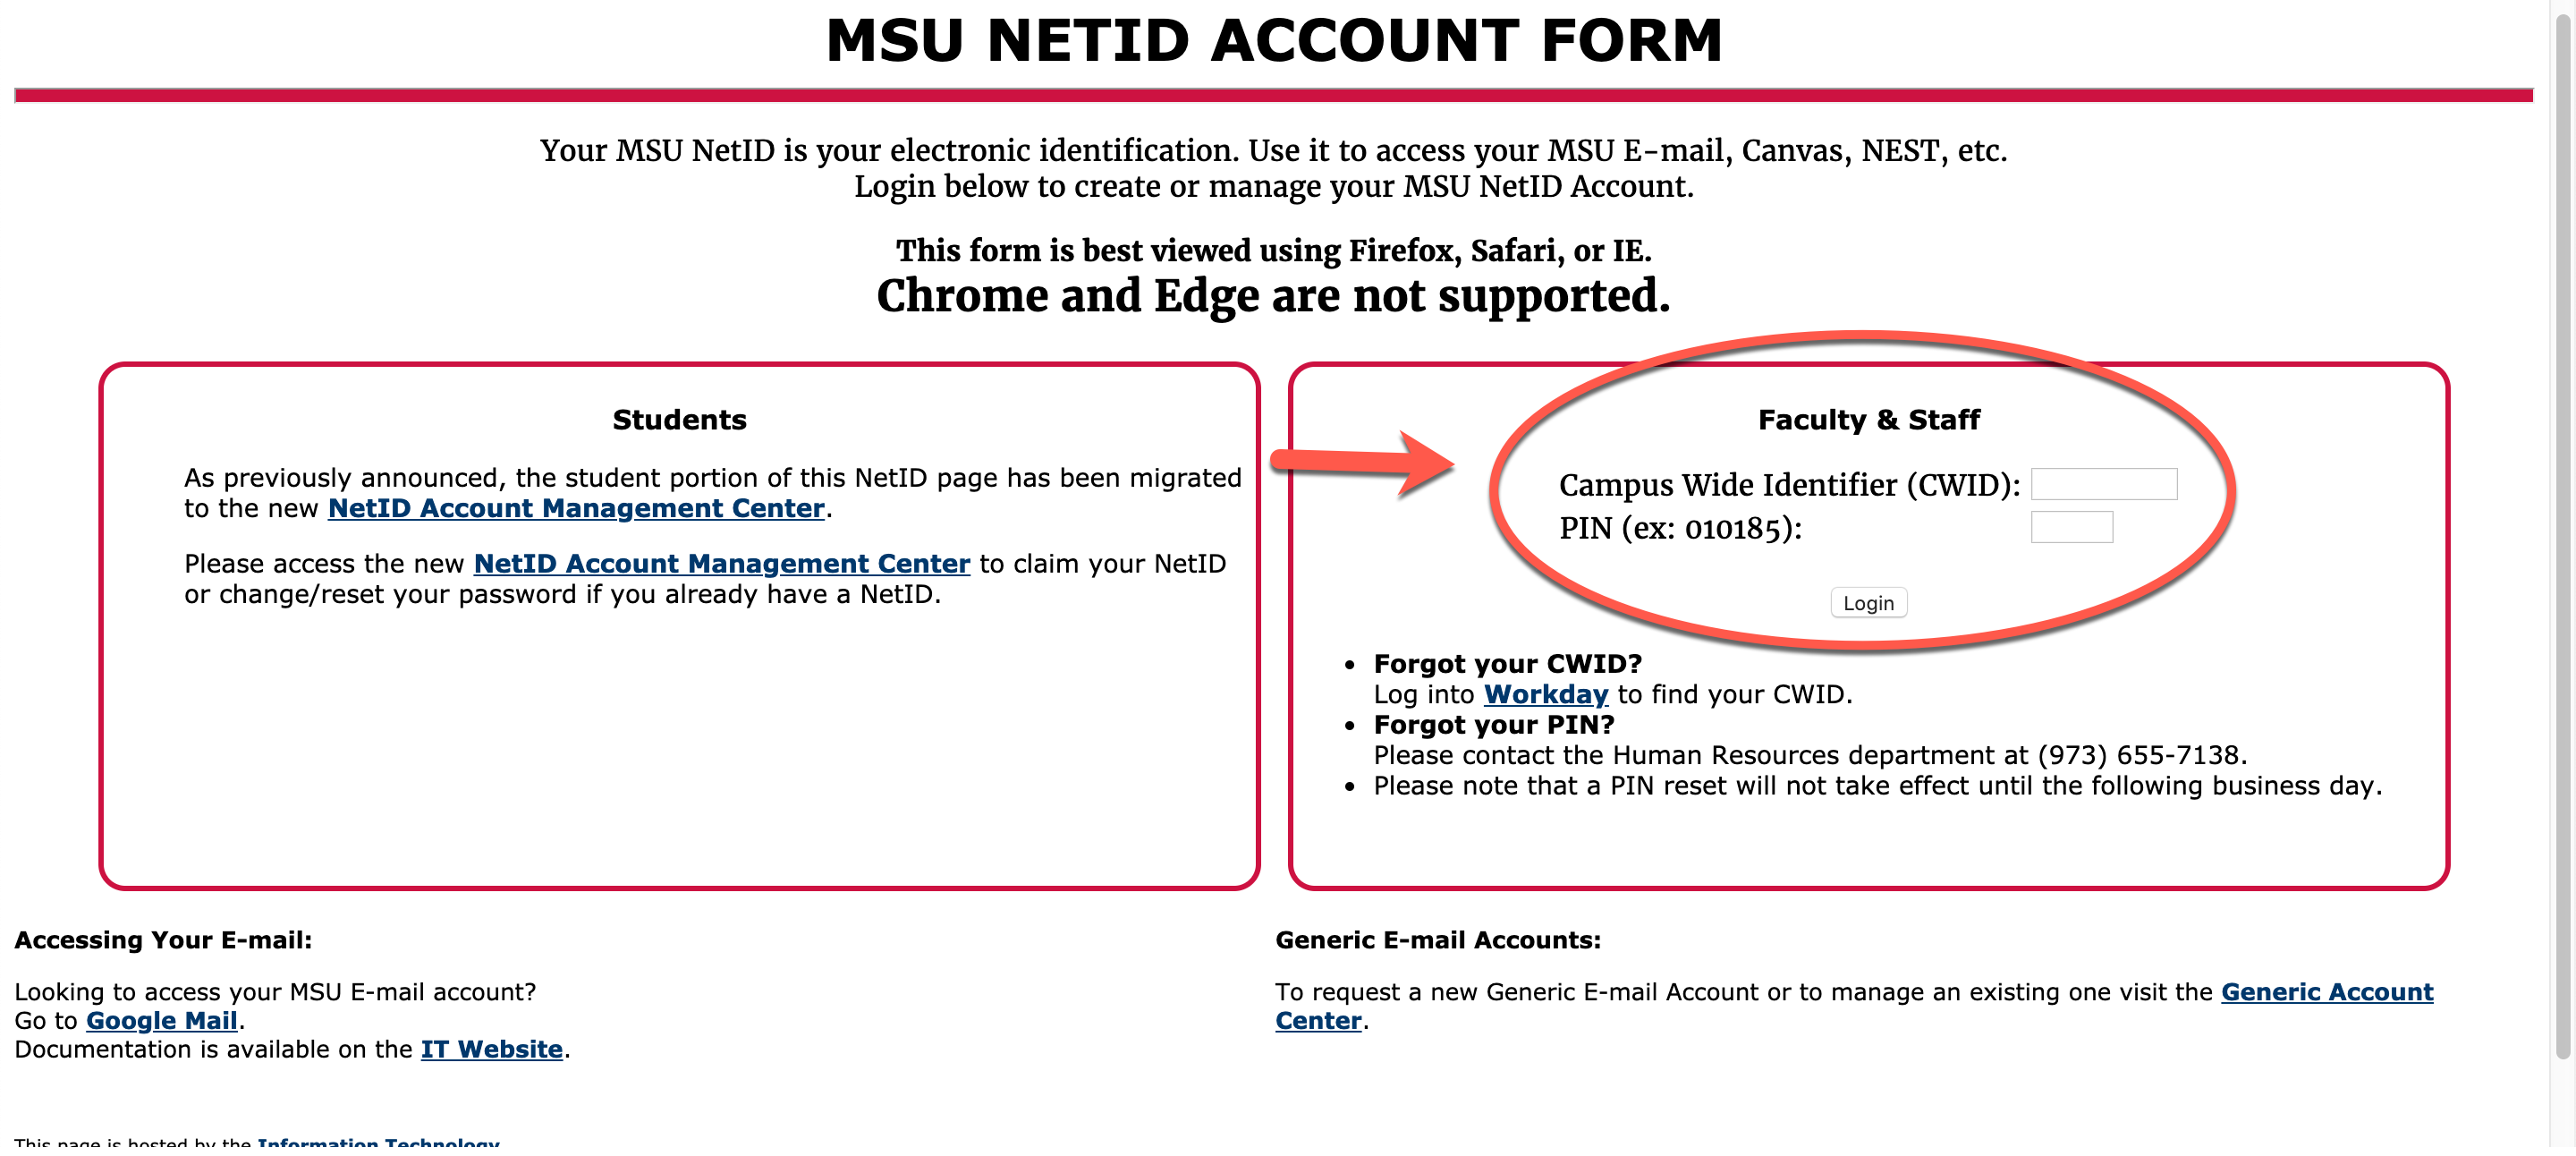 Netid form screenshot with faculty and staff highlighted